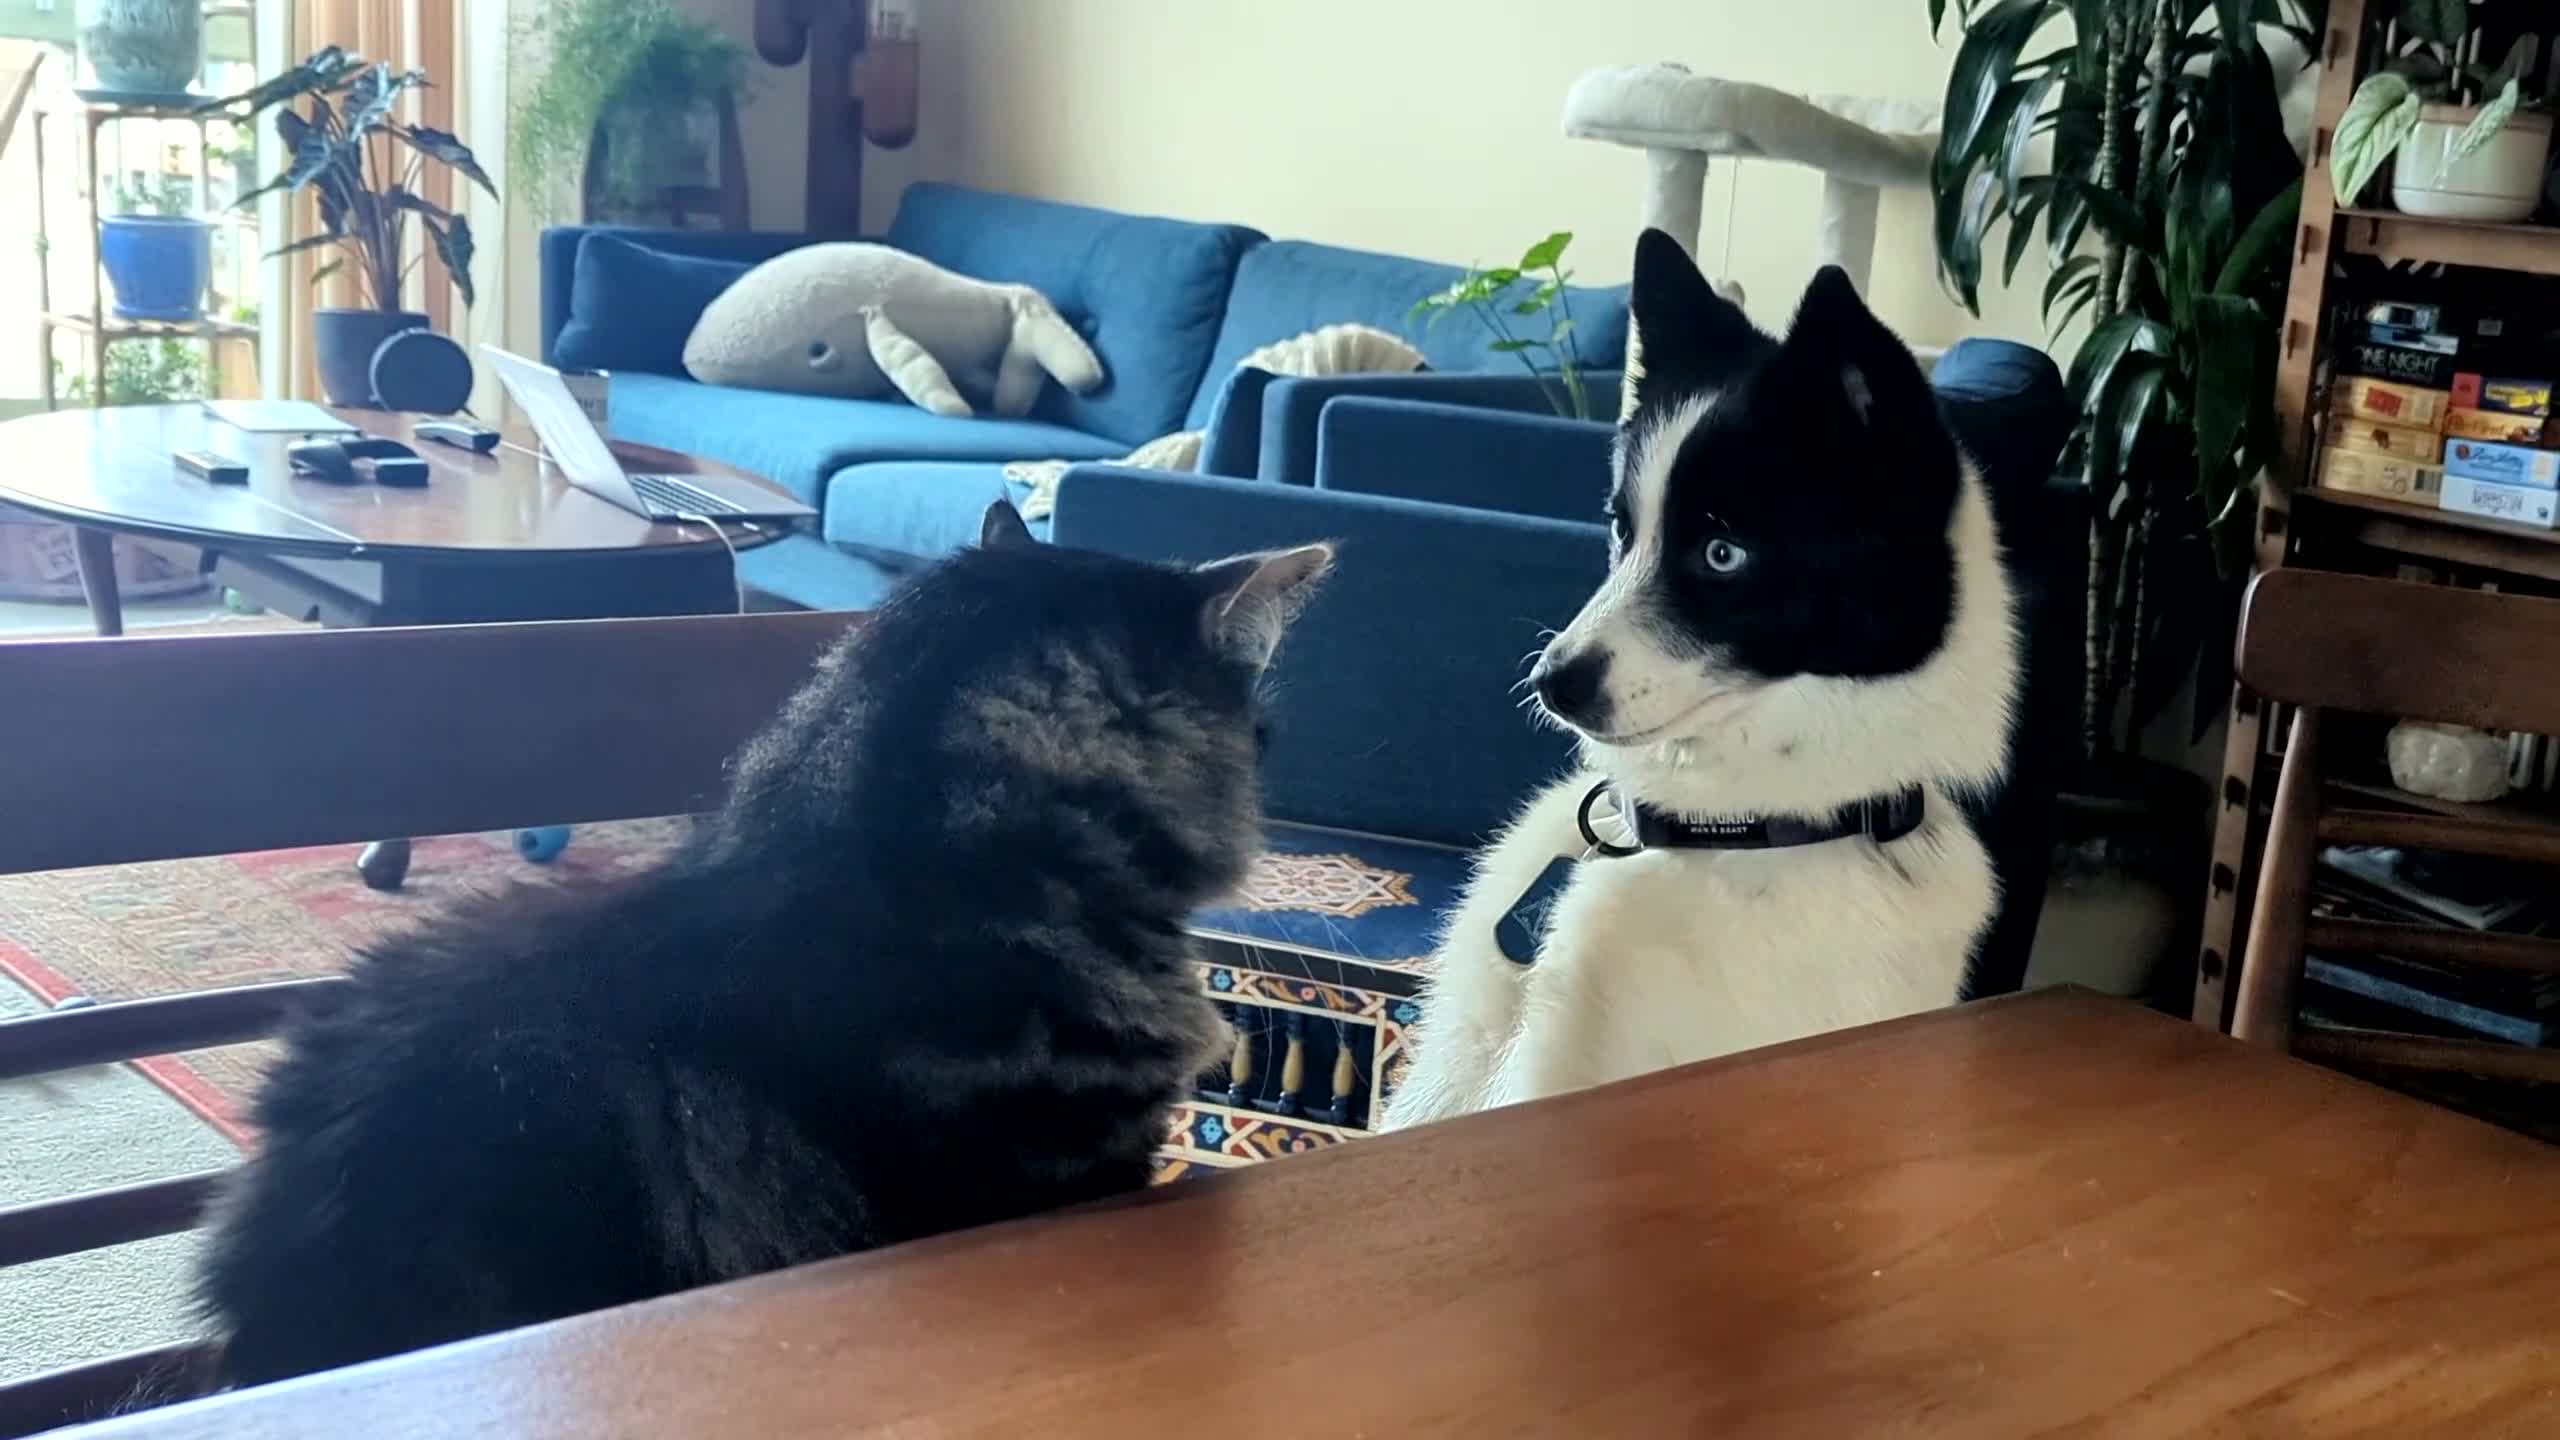 Dog and Cat Play Together